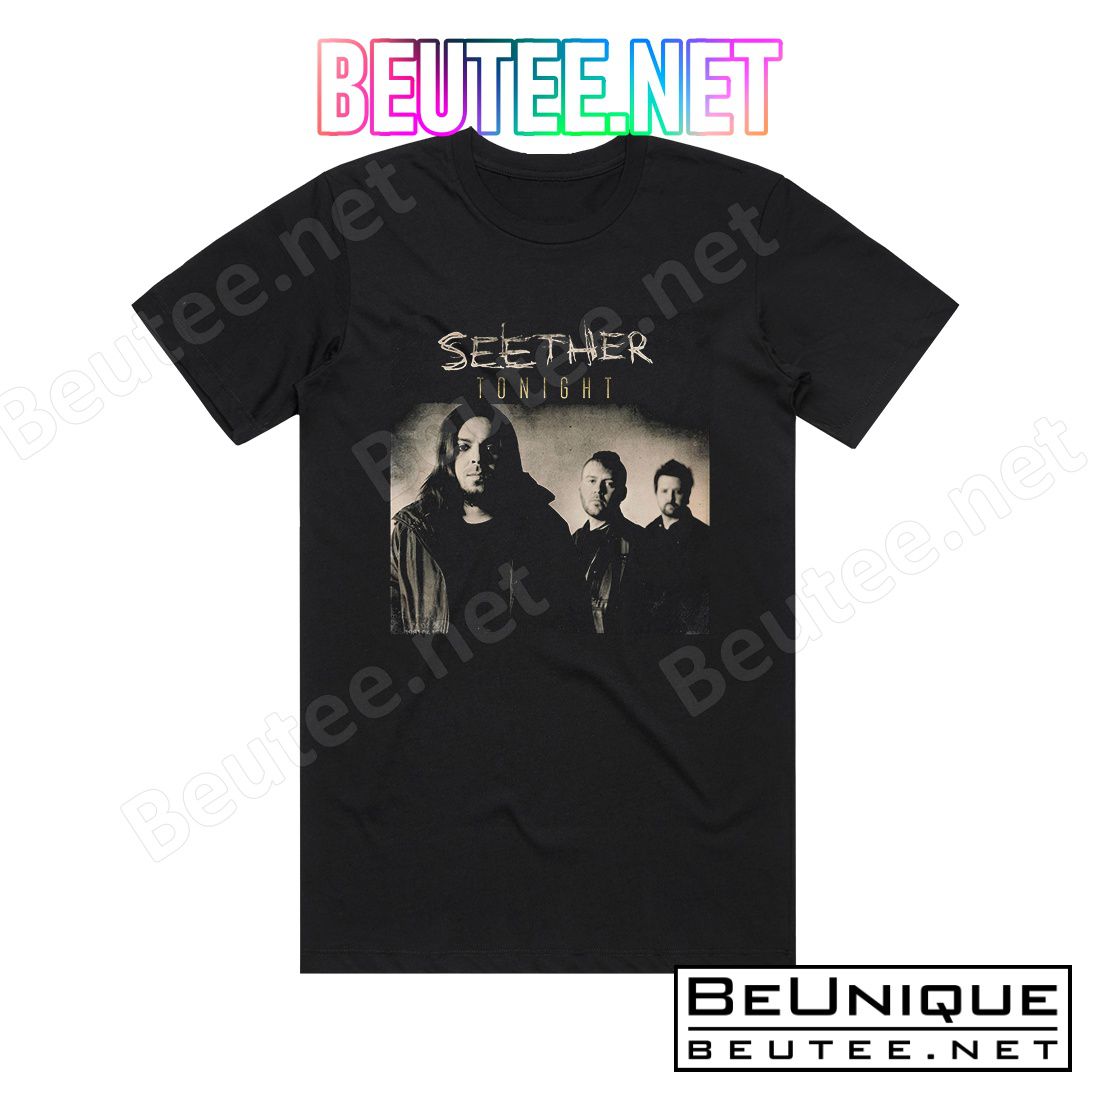 Seether Tonight Album Cover T-Shirt